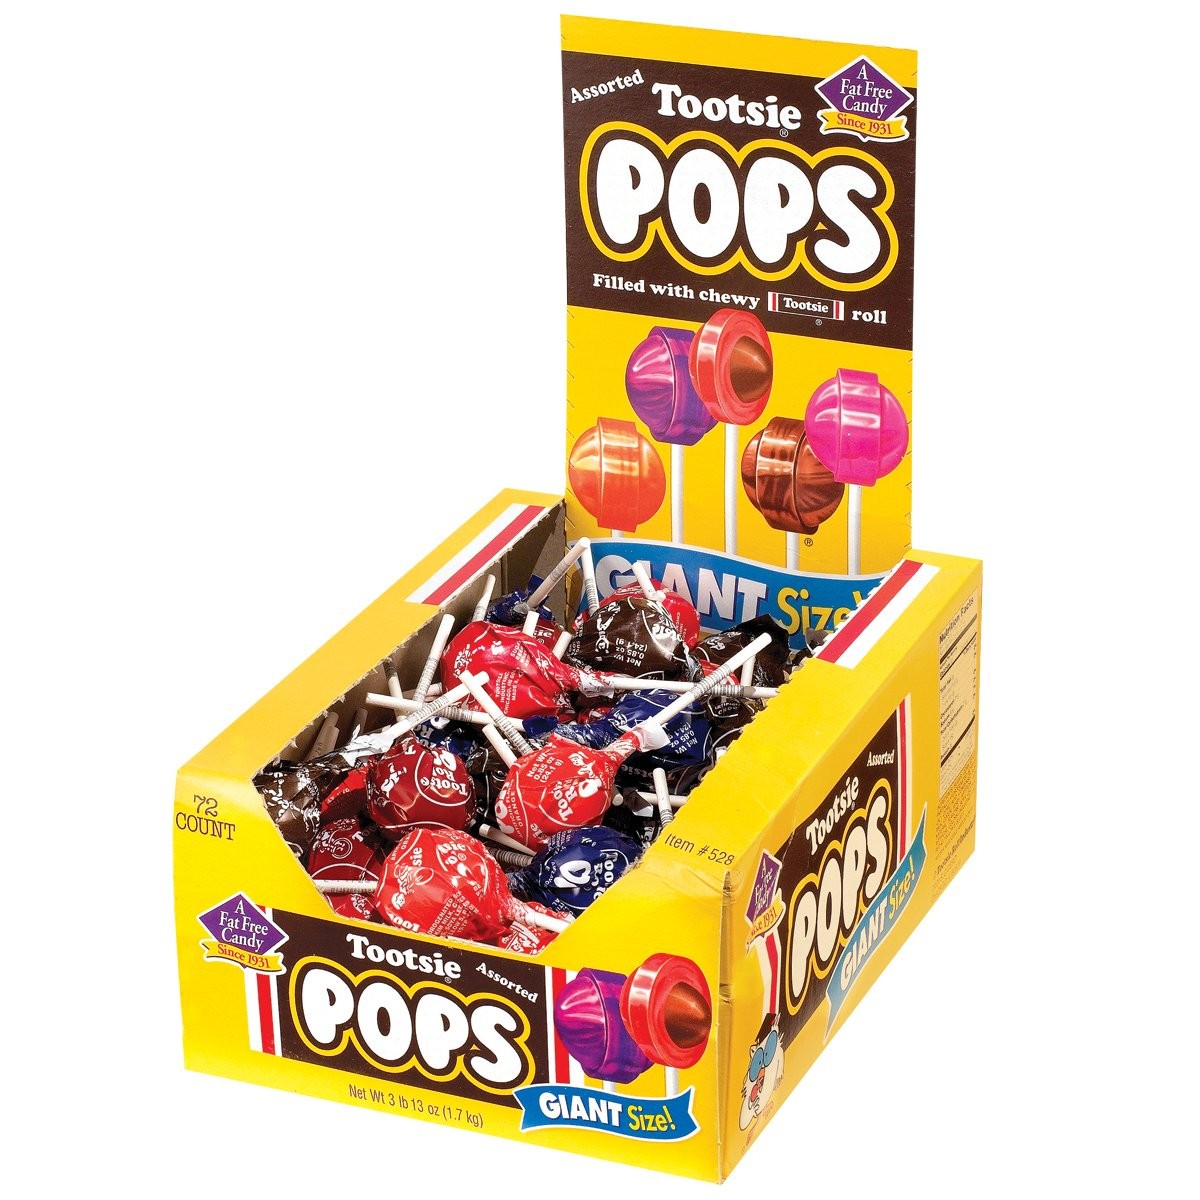 Tootsie Pops - Want to be the first to know about new giveaways